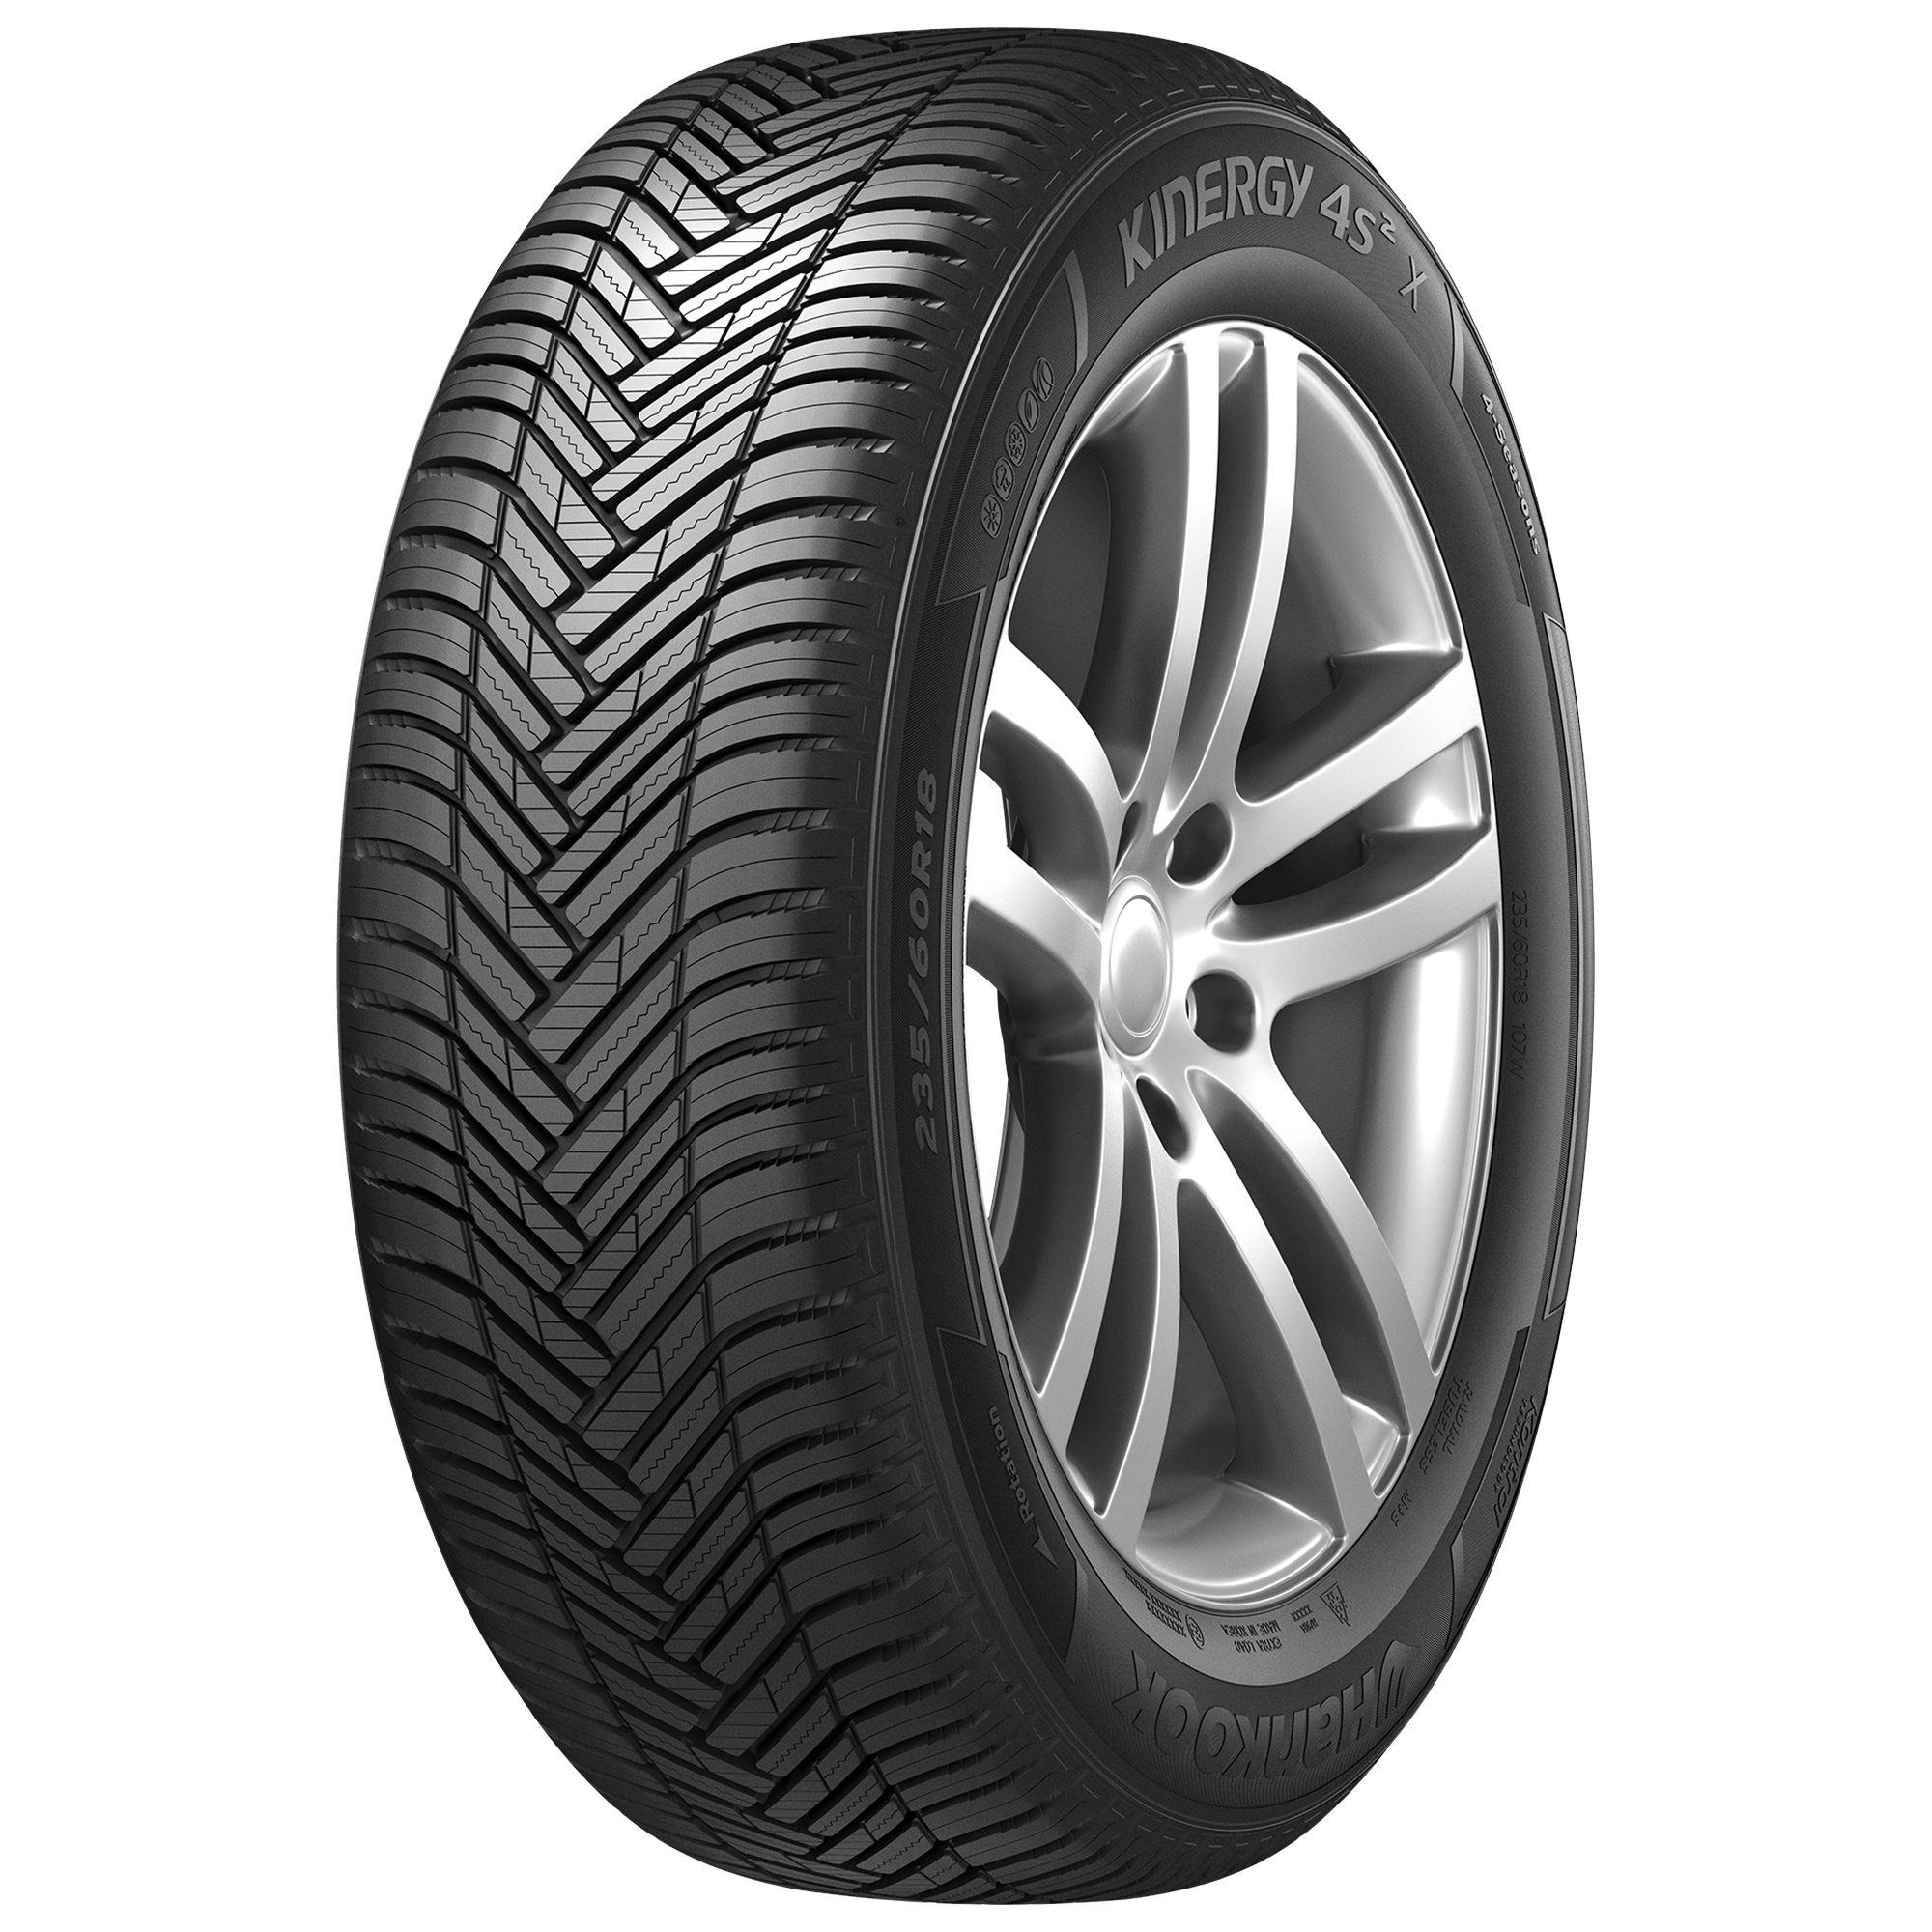 HANKOOK KINERGY 4S 2 X (H750A) 255/55R18 109V BSW